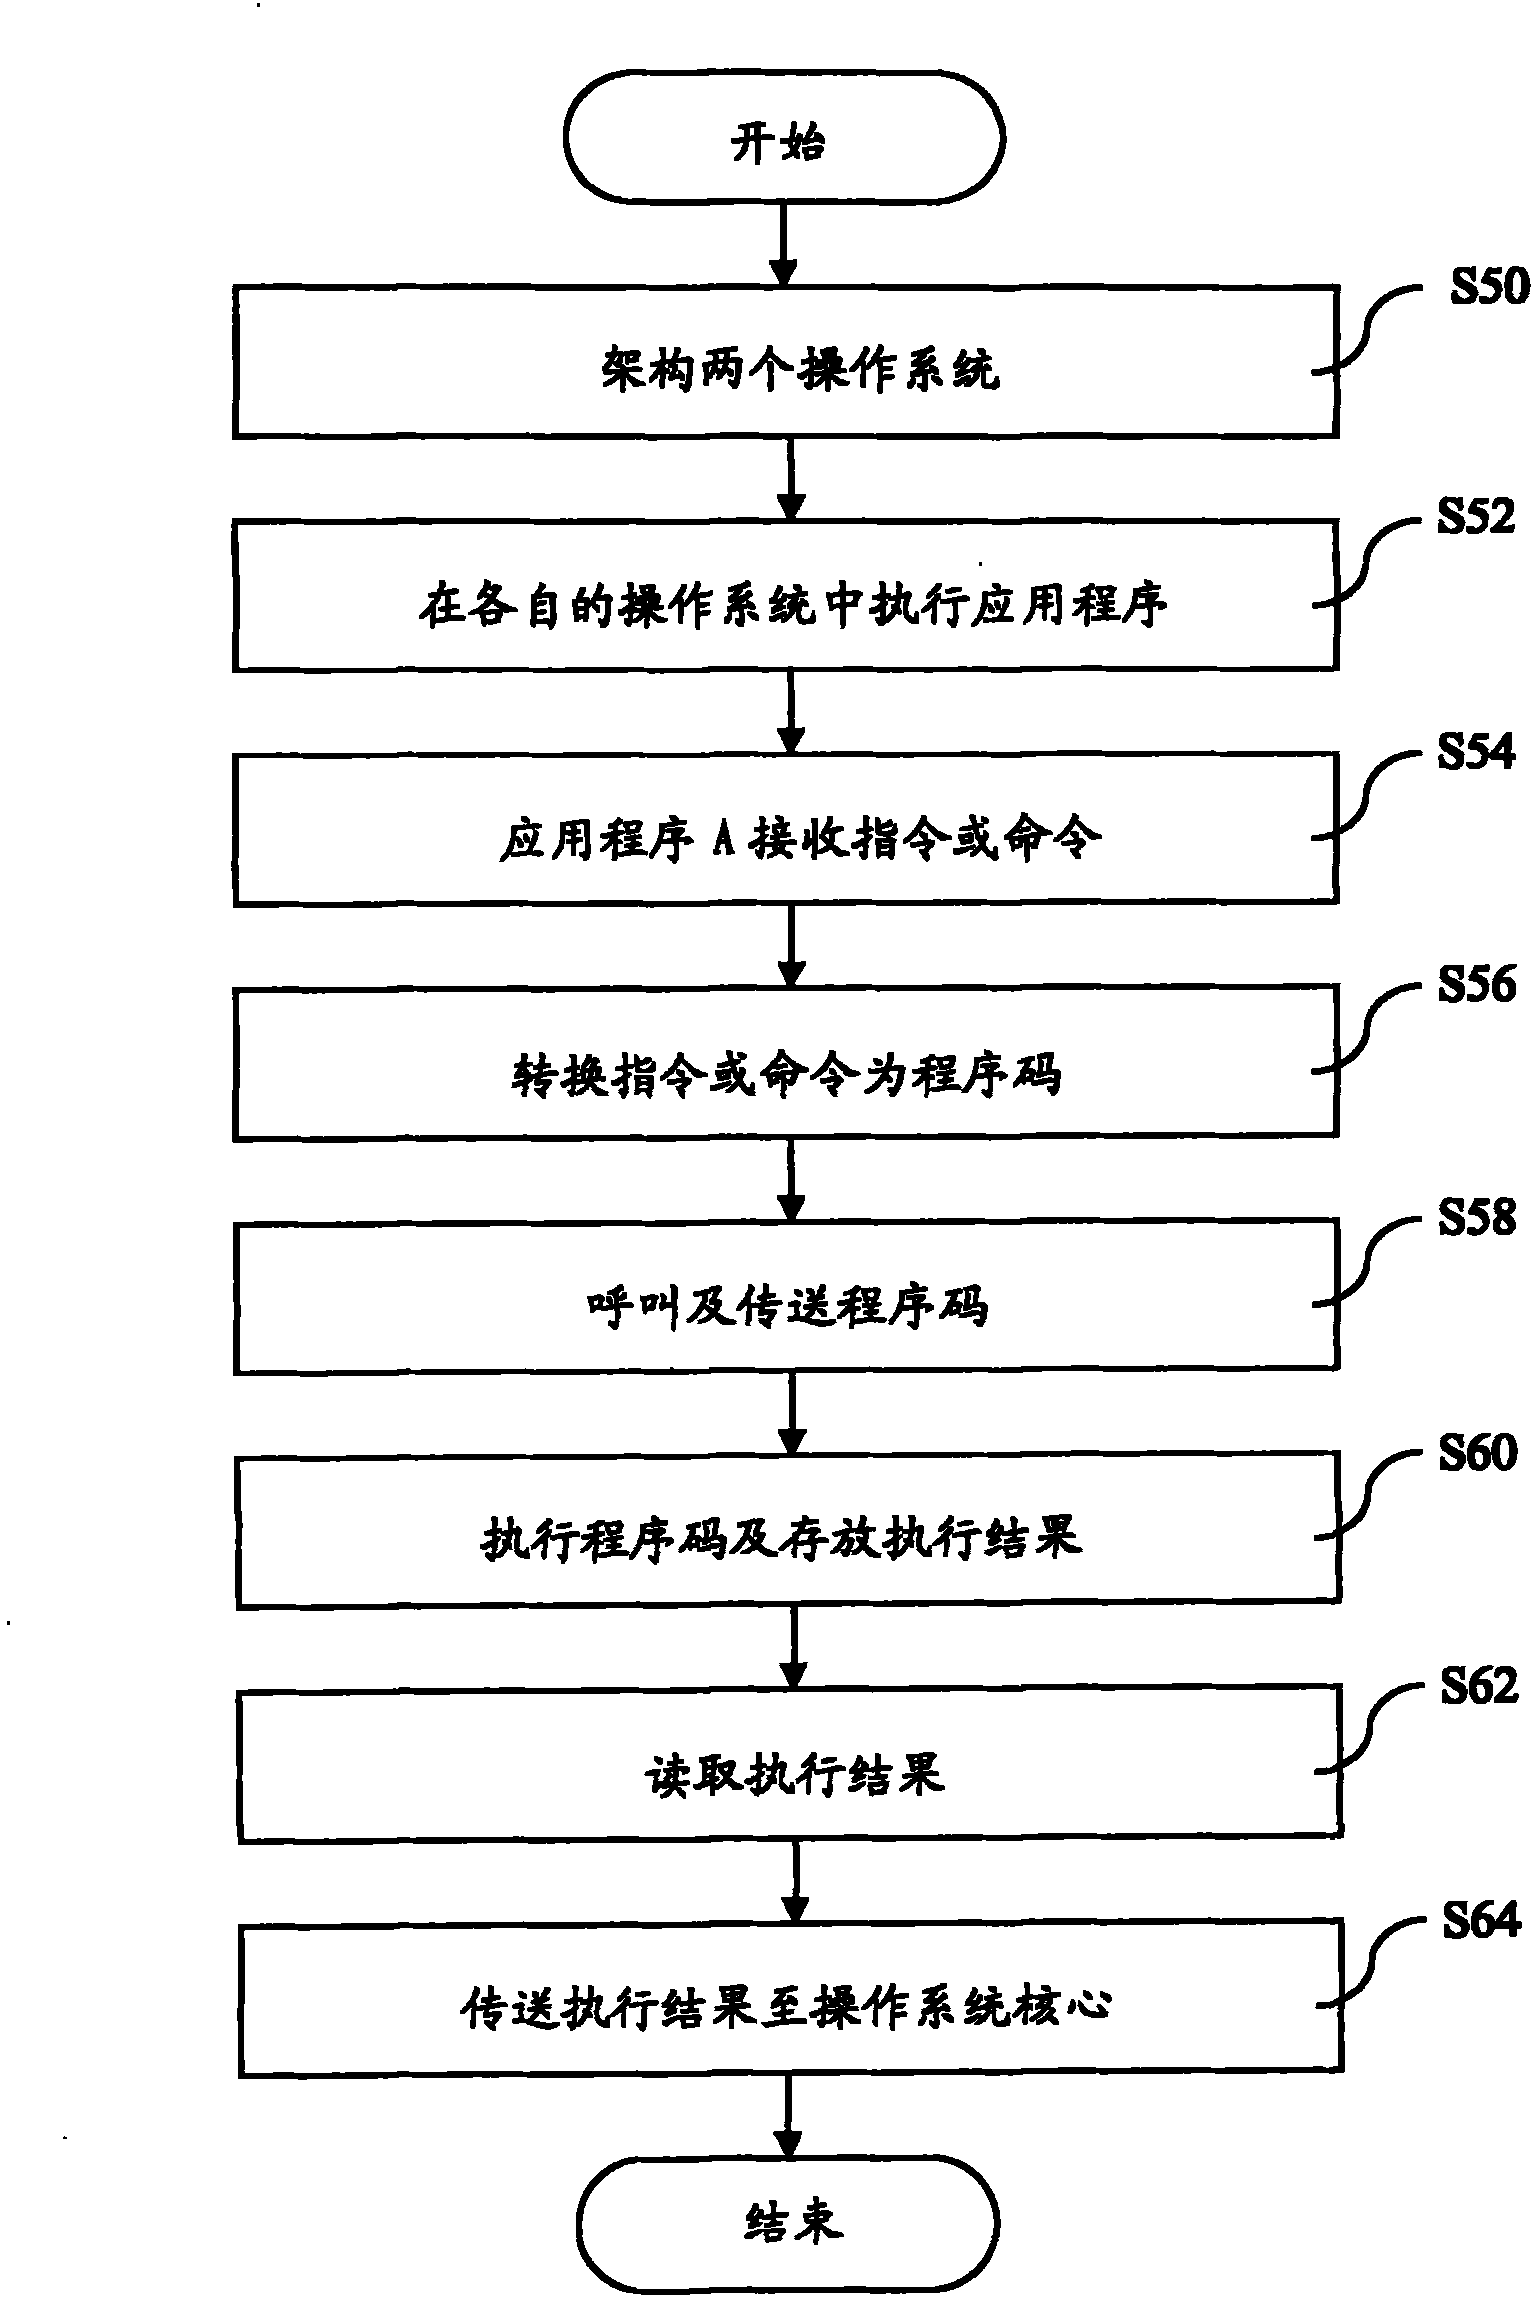 Parallel processing method for dual-operation system